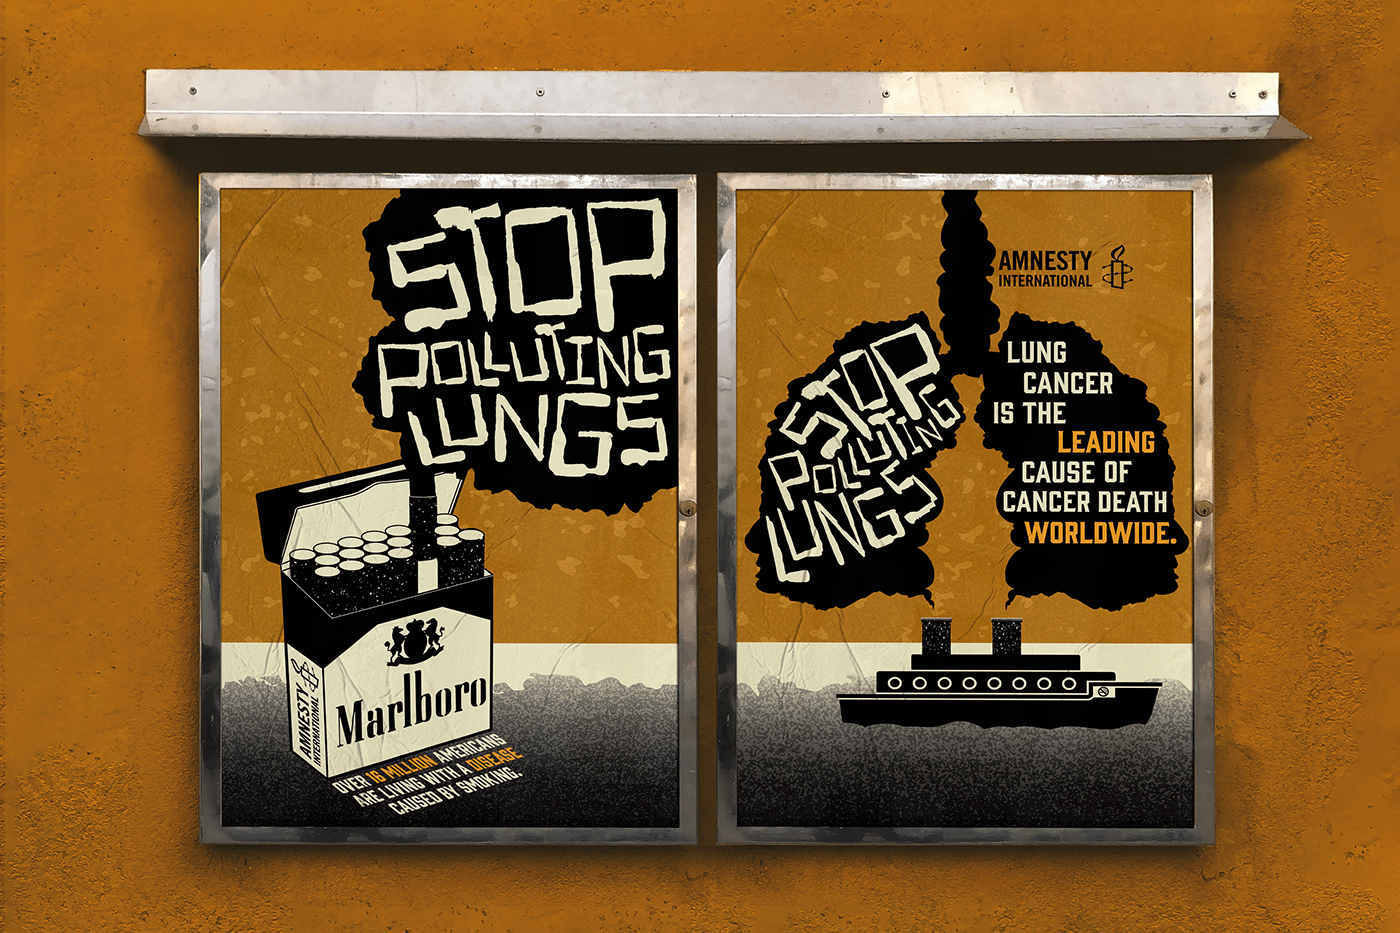 "STOP POLLUTING LUNGS", Amnesty International - Social Cause Campaign